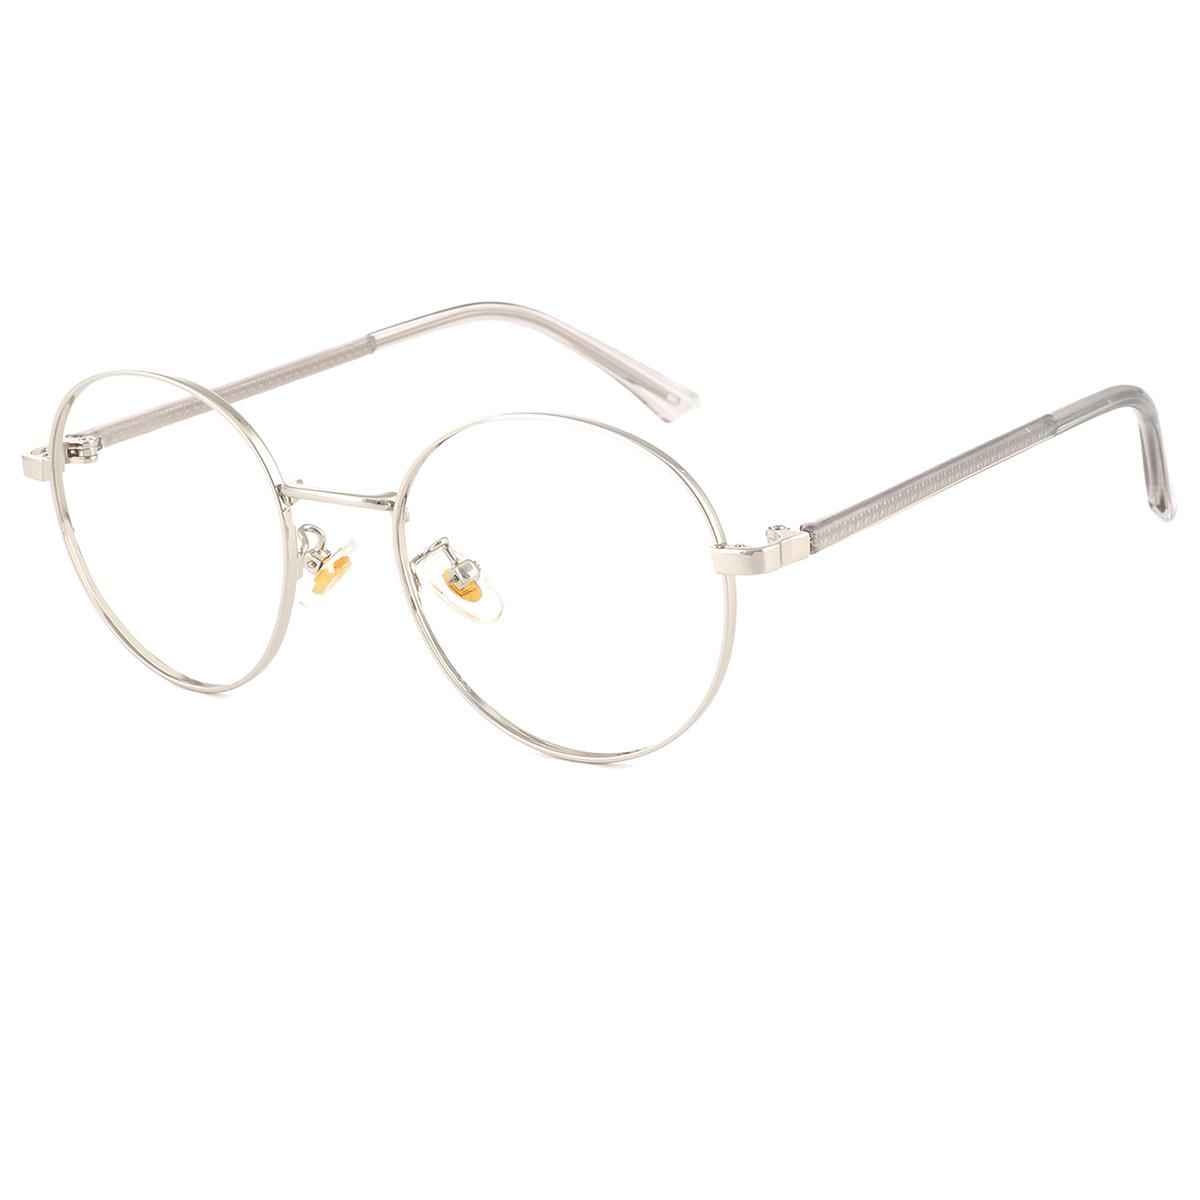 Lycus - Round Silver Reading Glasses for Men & Women